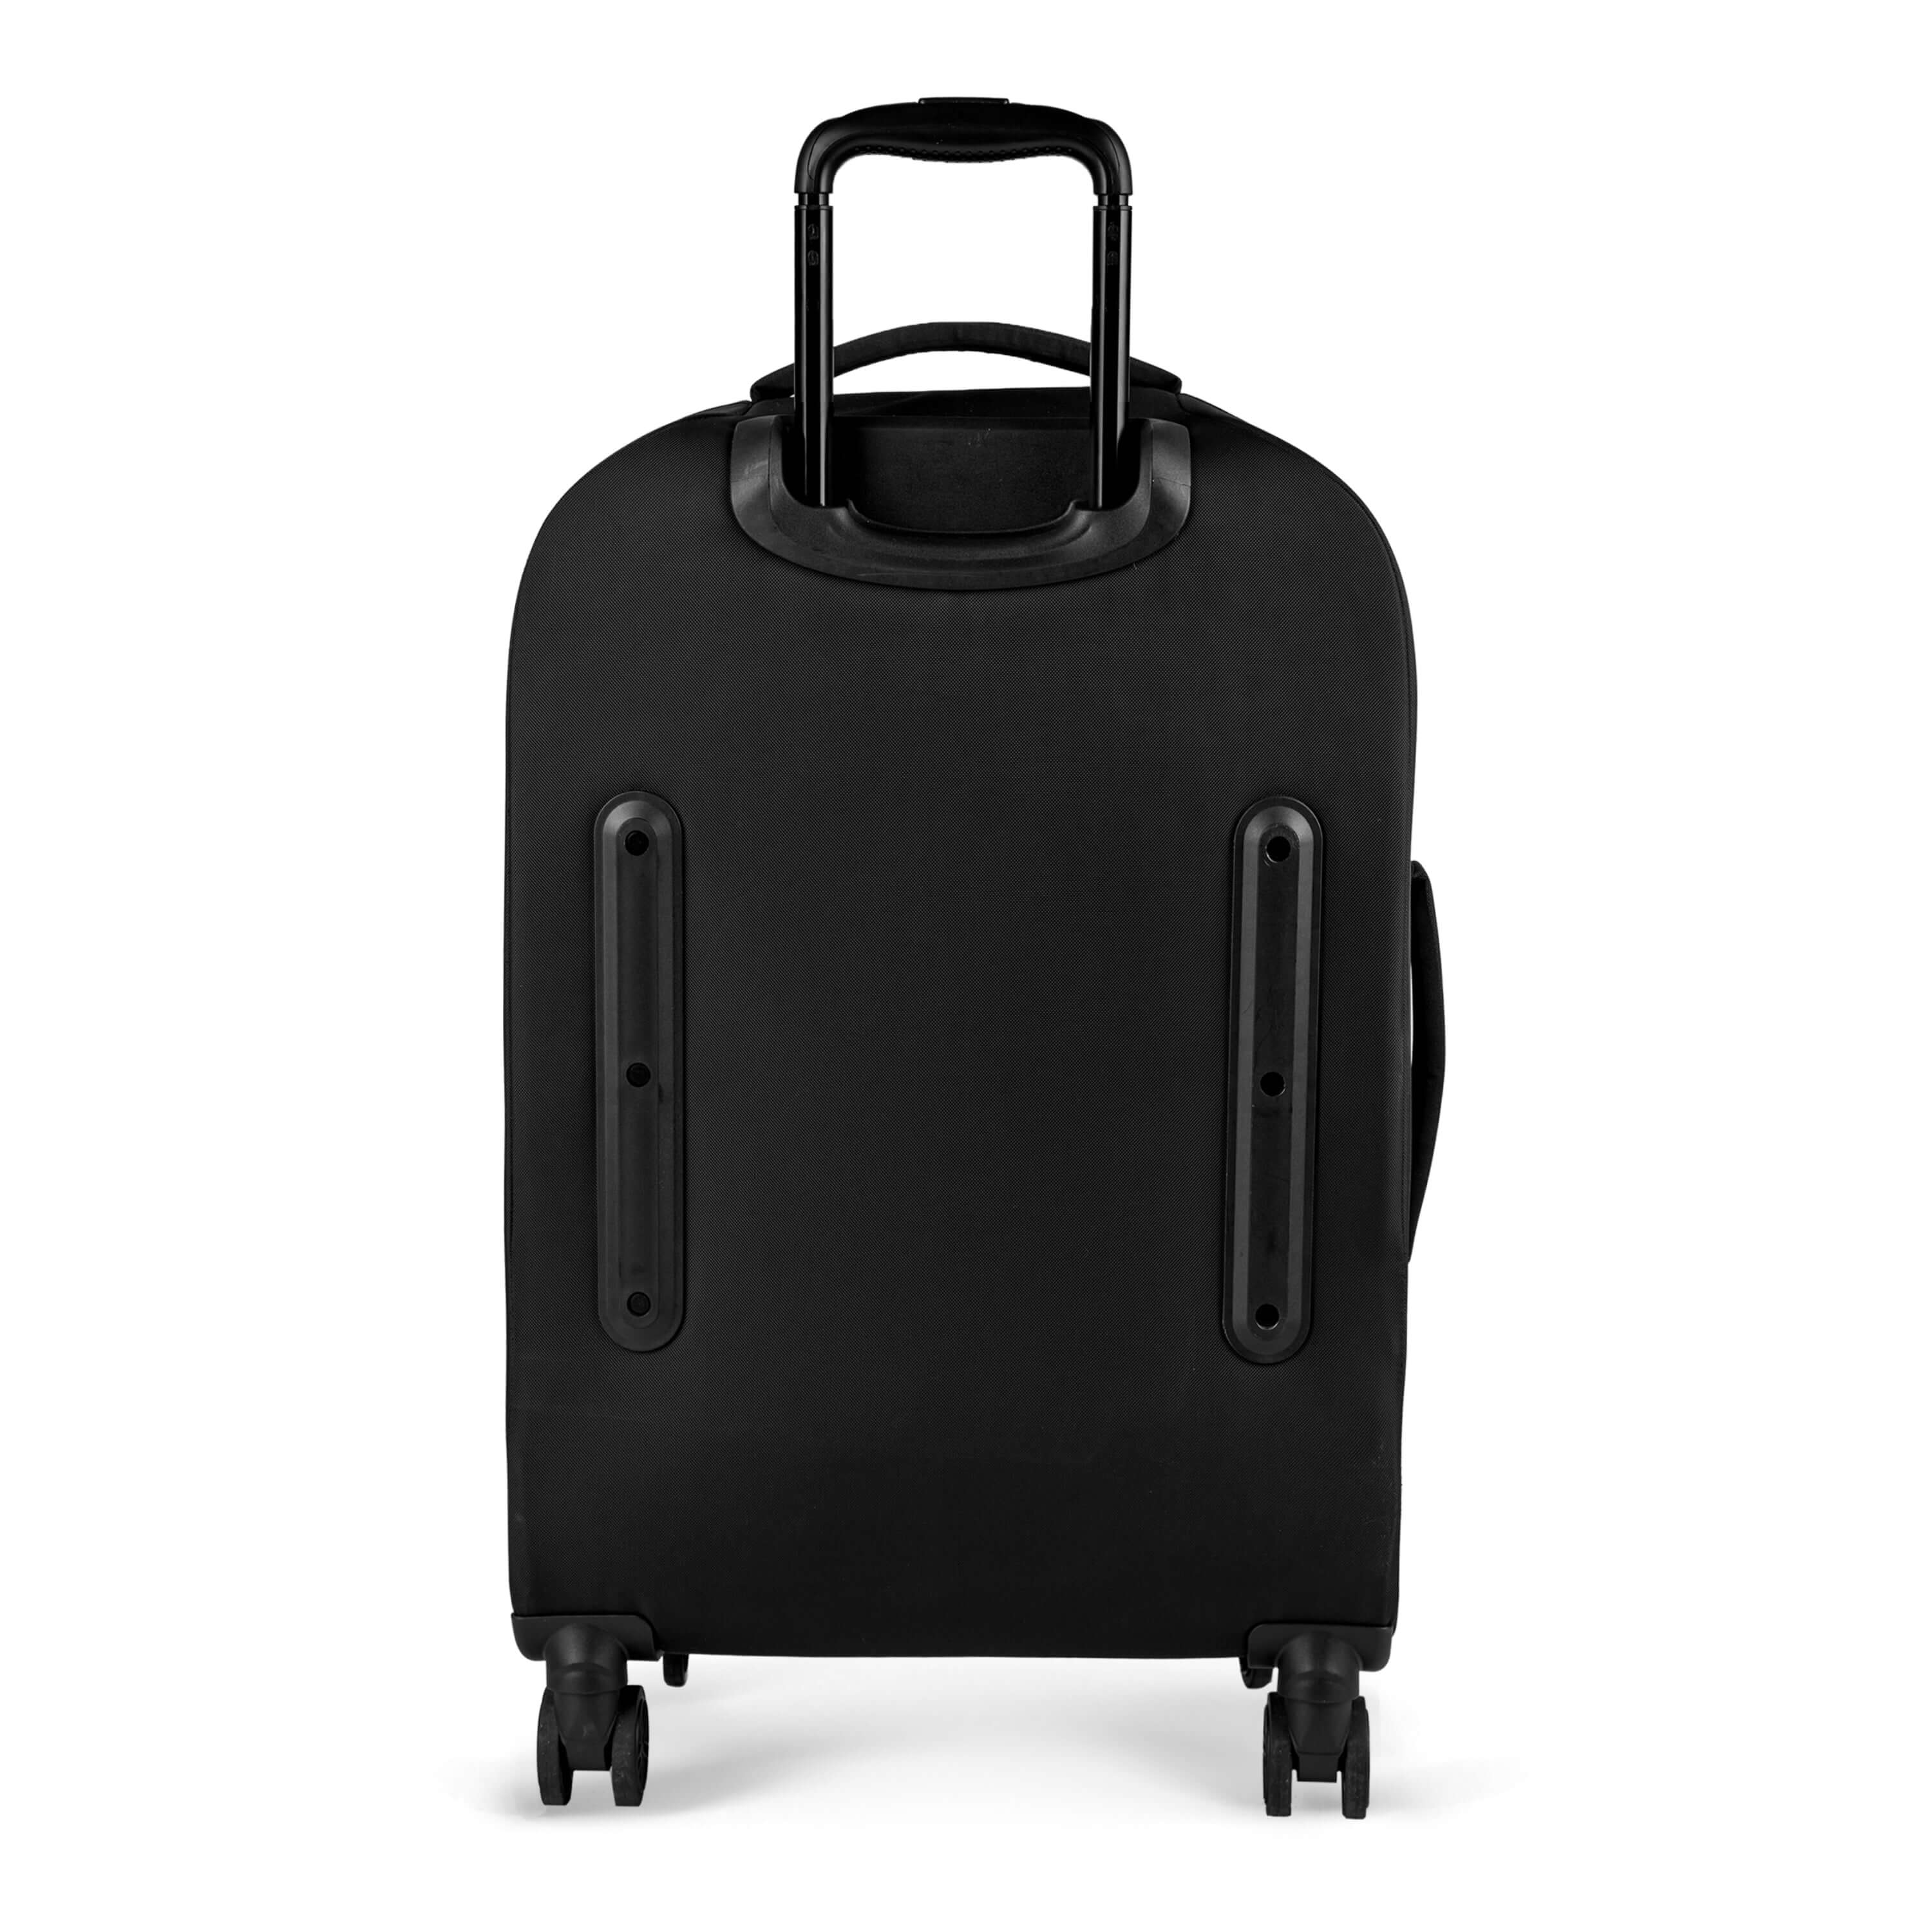 Flat view of the back of Sherpani’s Anti-Theft luggage, the Hemisphere. The back of the suitcase is black and has vegan leather accents in black. On the top of the suitcase sits a retractable luggage handle. On the top and side sit two easy-access handles. At the bottom are four 36-degree spinner wheels for smooth rolling. 